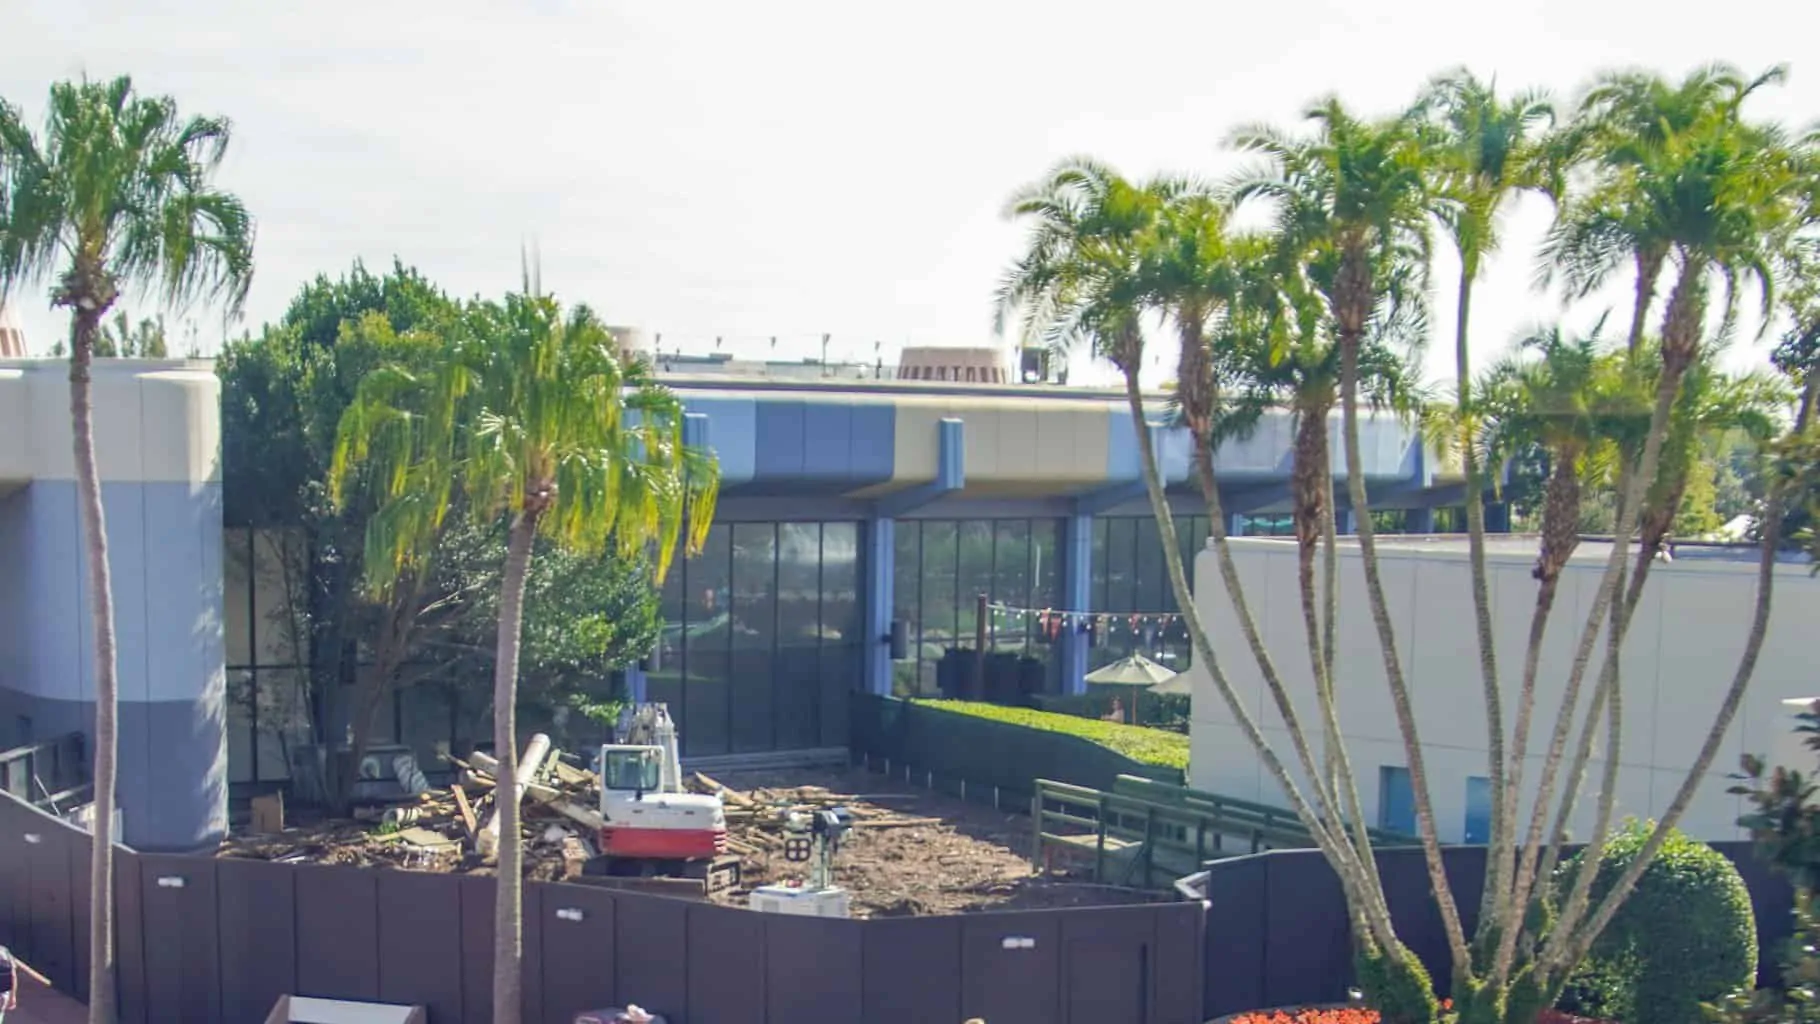 Innoventions West Demolition Epcot Construction Updates November 2019